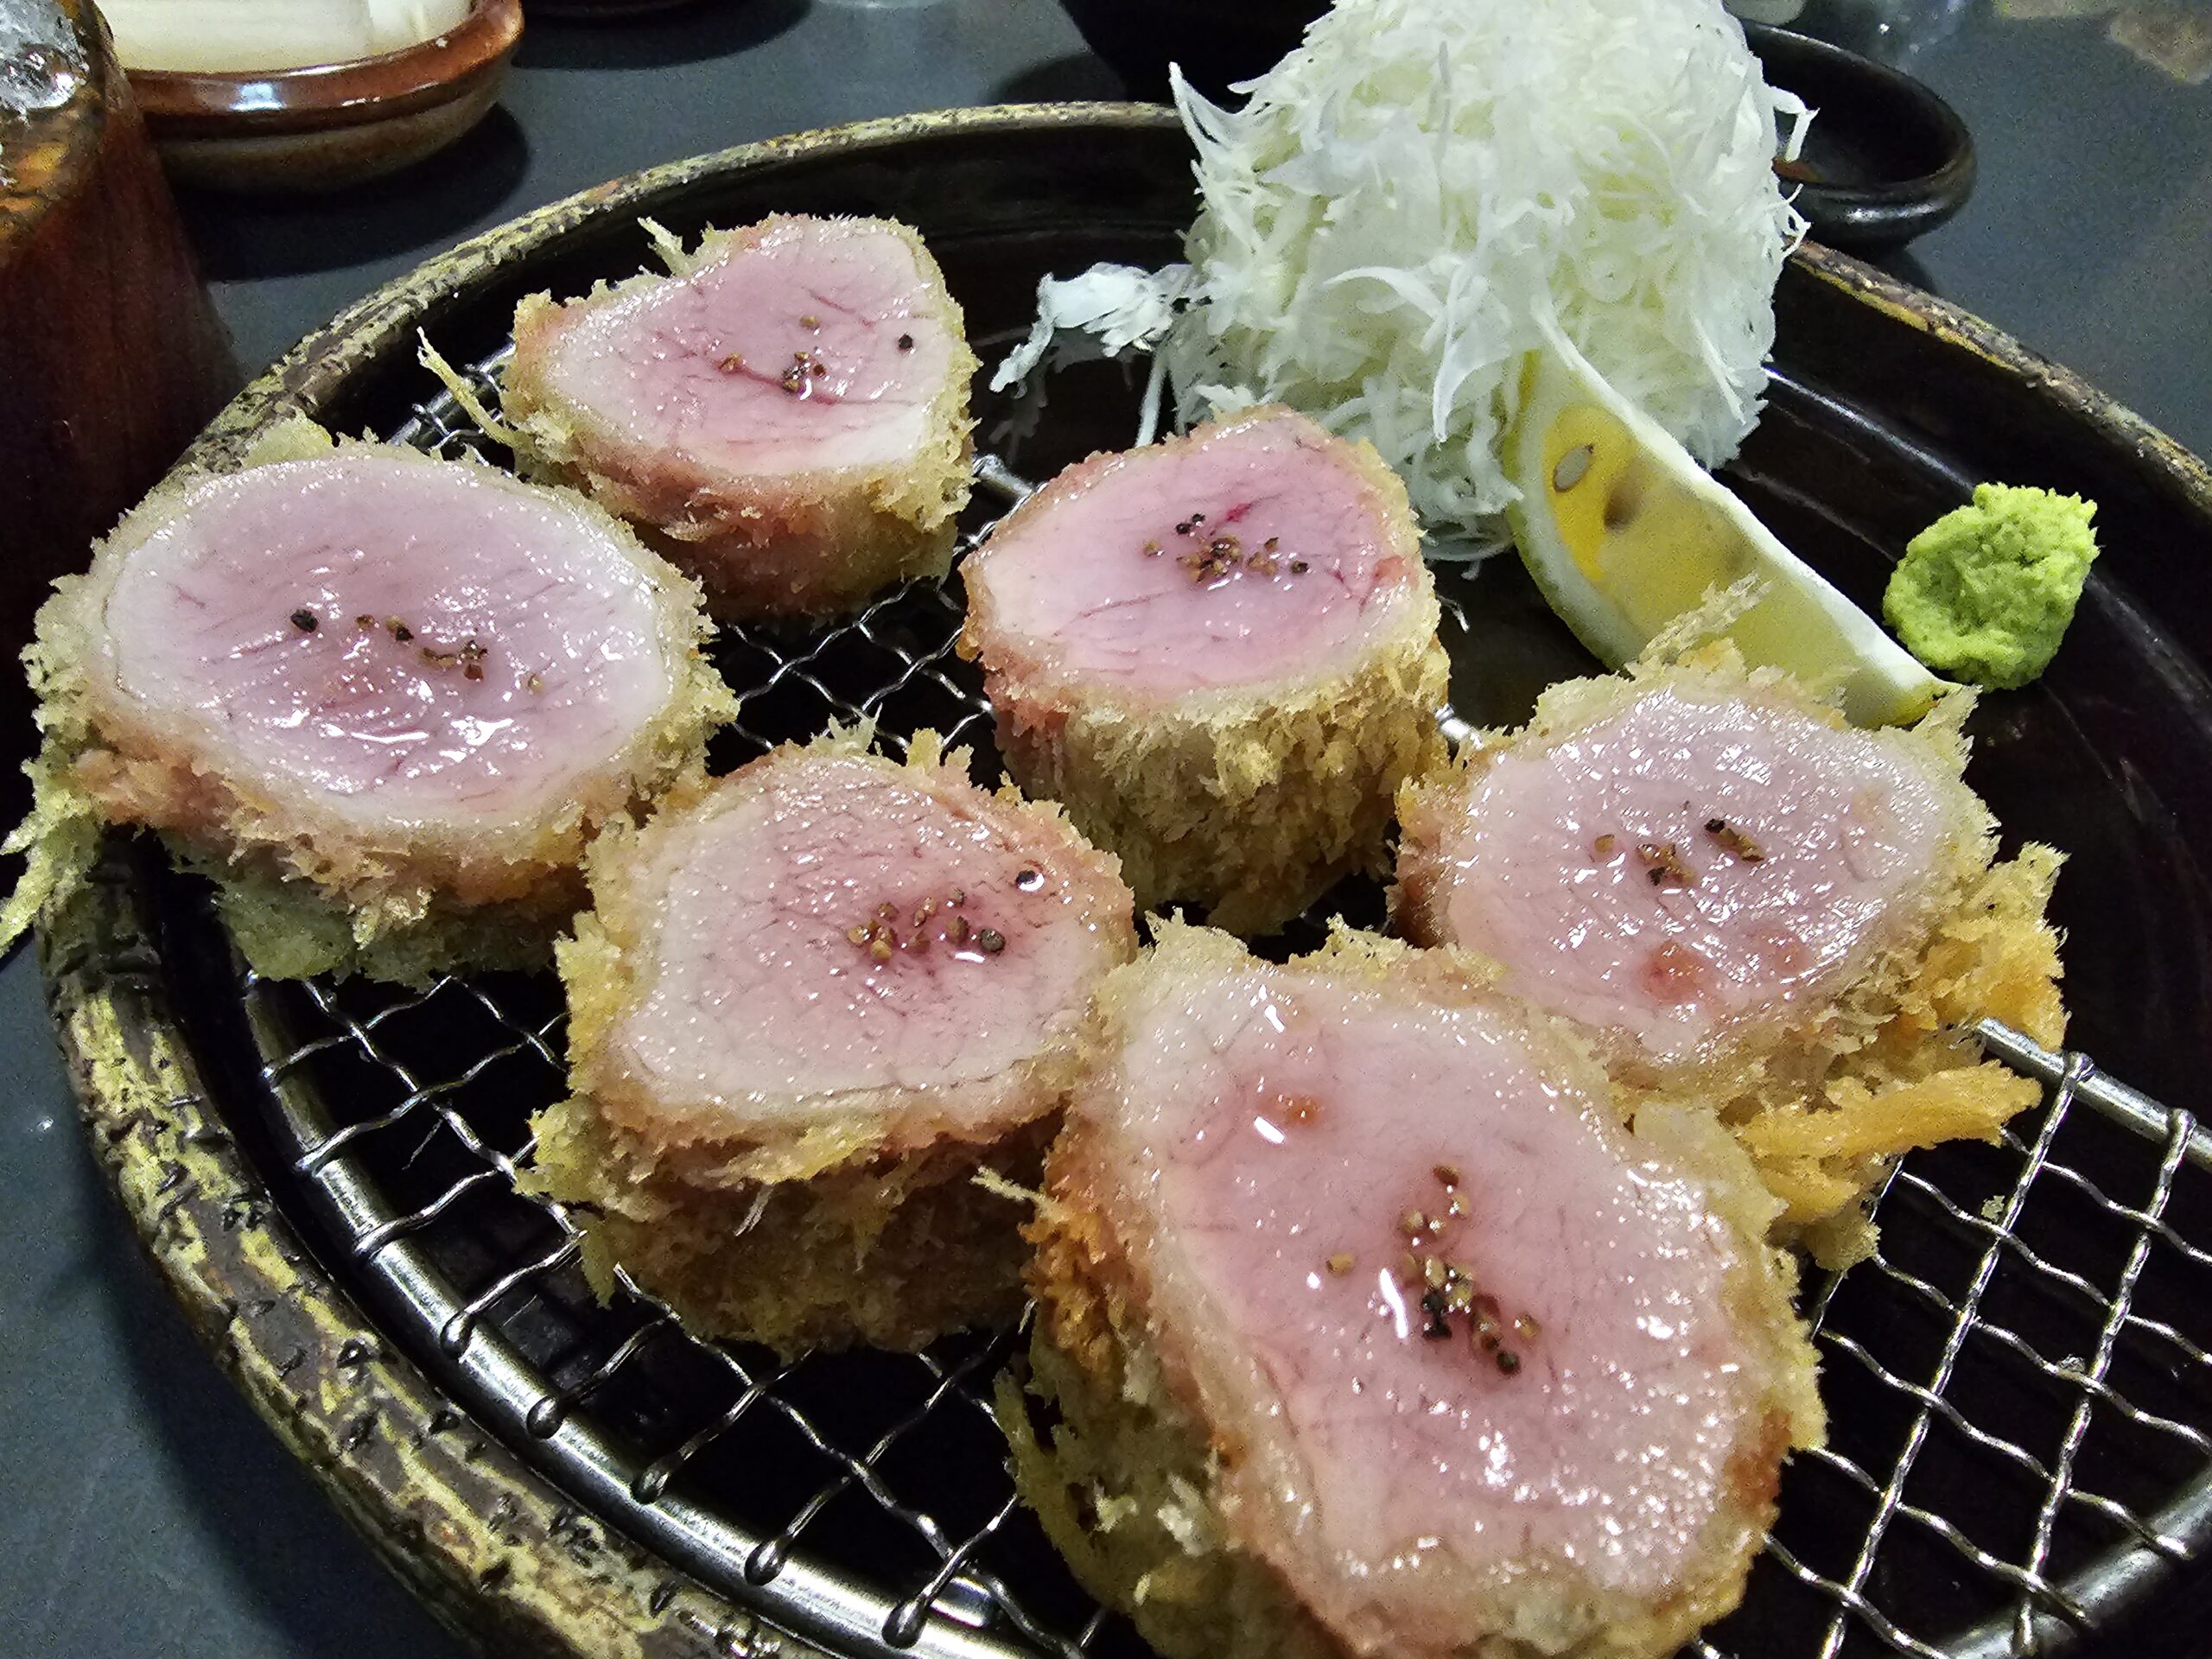 The Tenderloin Donkatsu is incredibly tender and lean